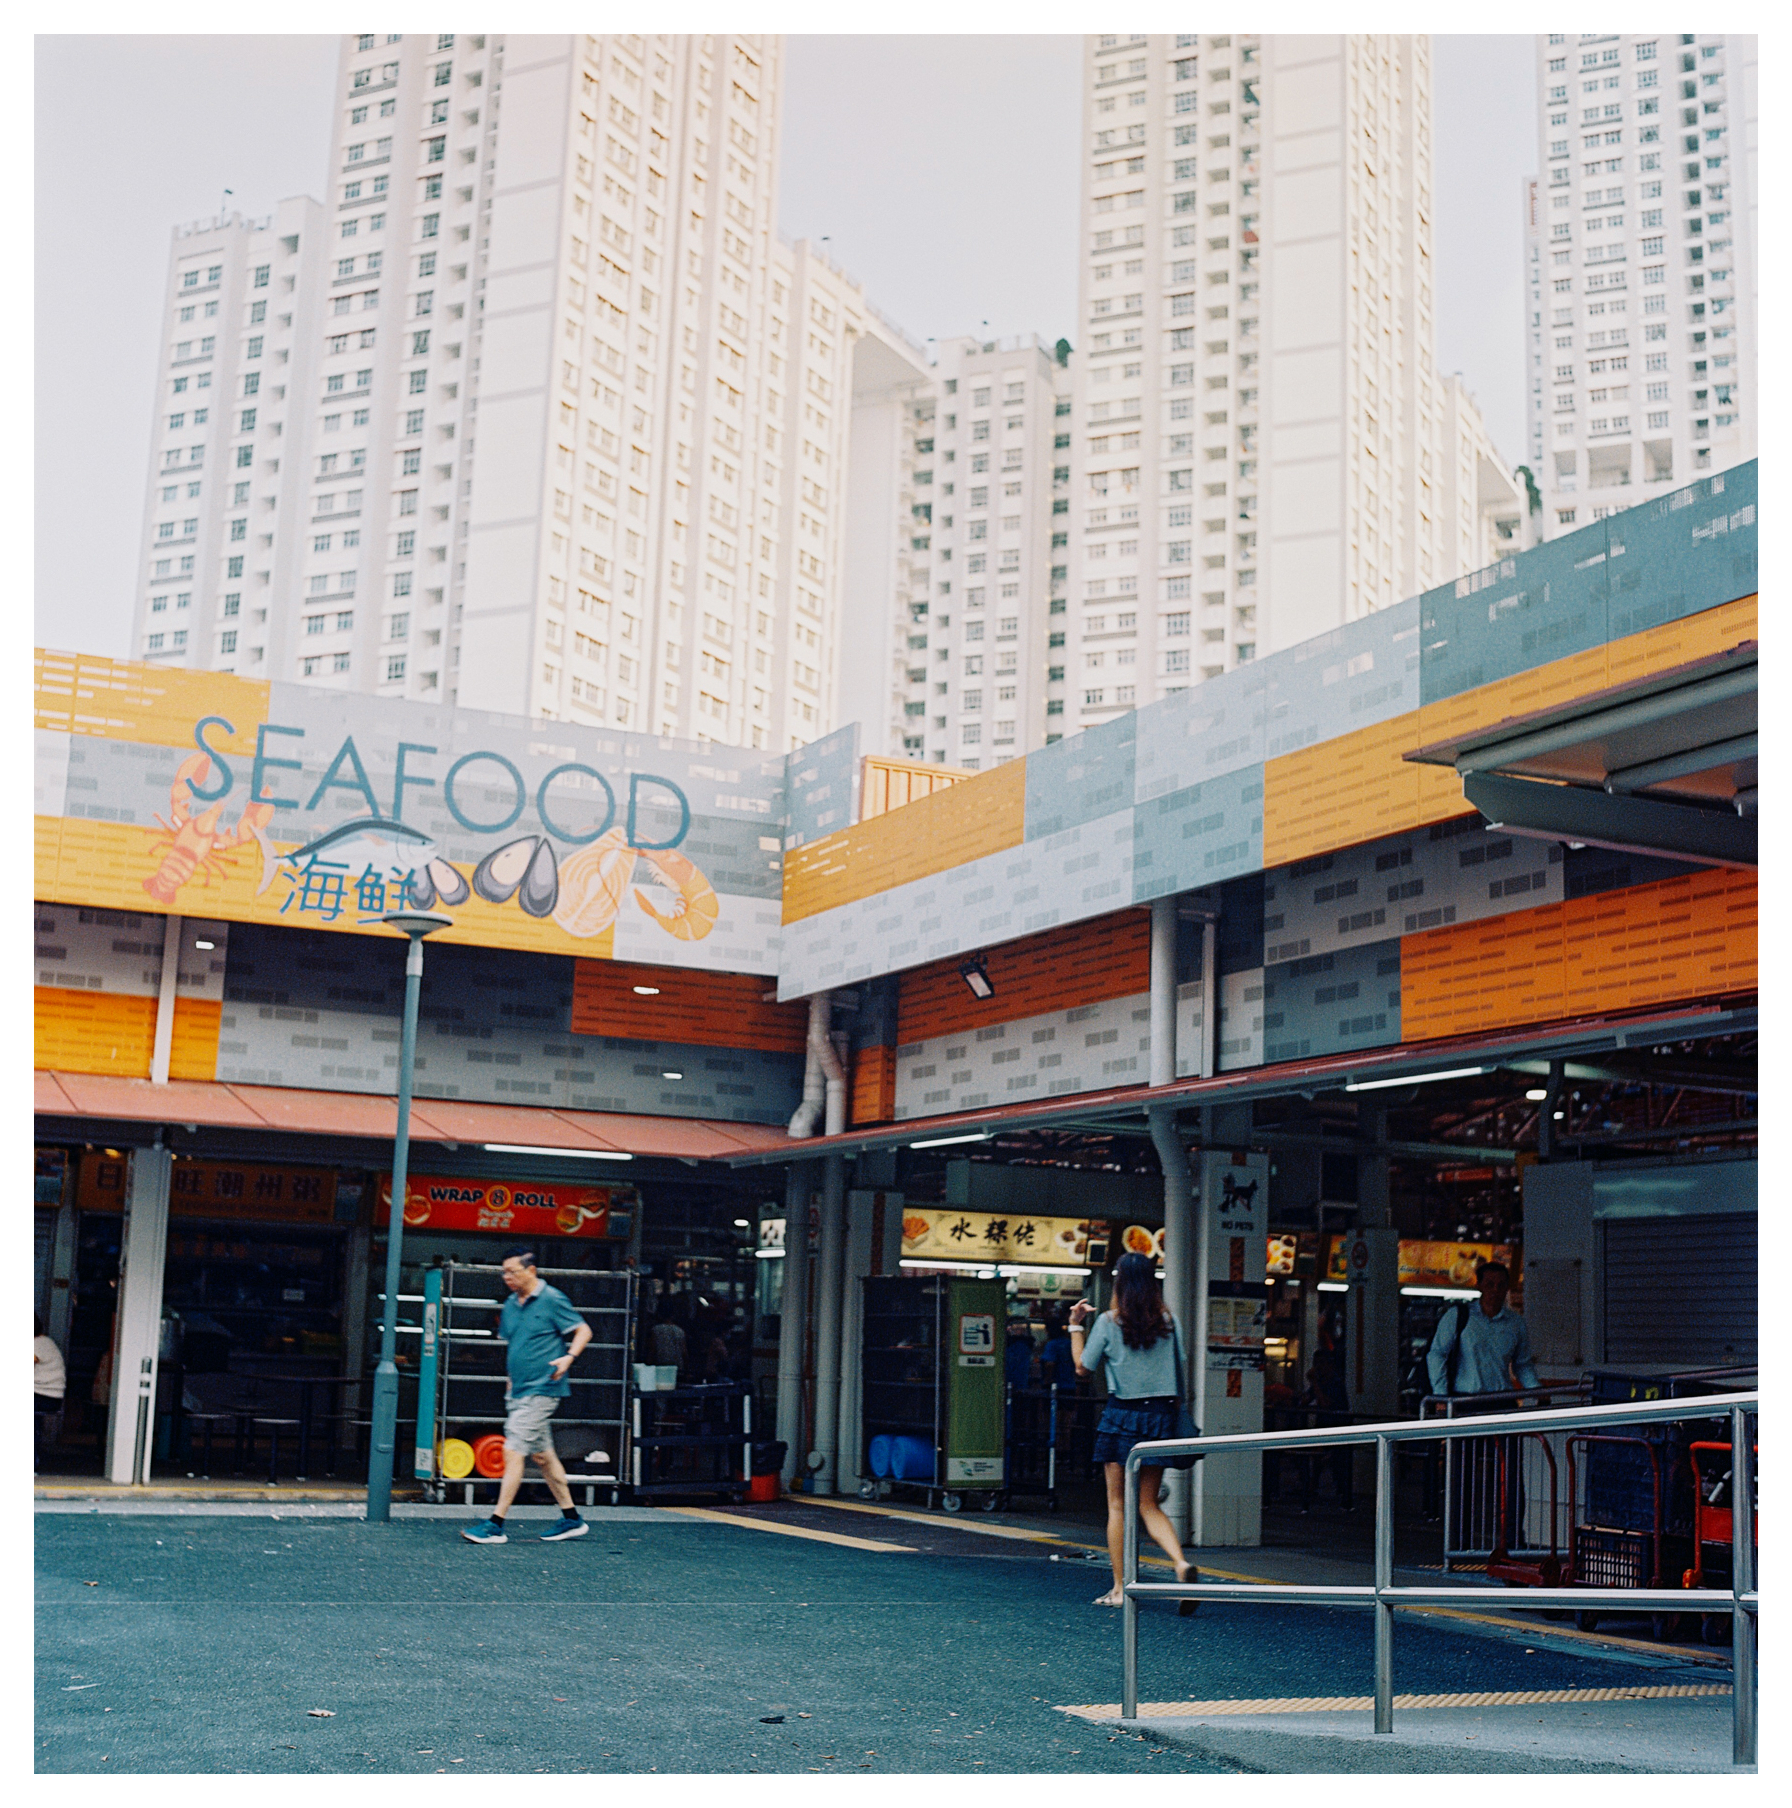 A scan of a medium format square color photo of a wet market in Singapore with tall buildings behind it